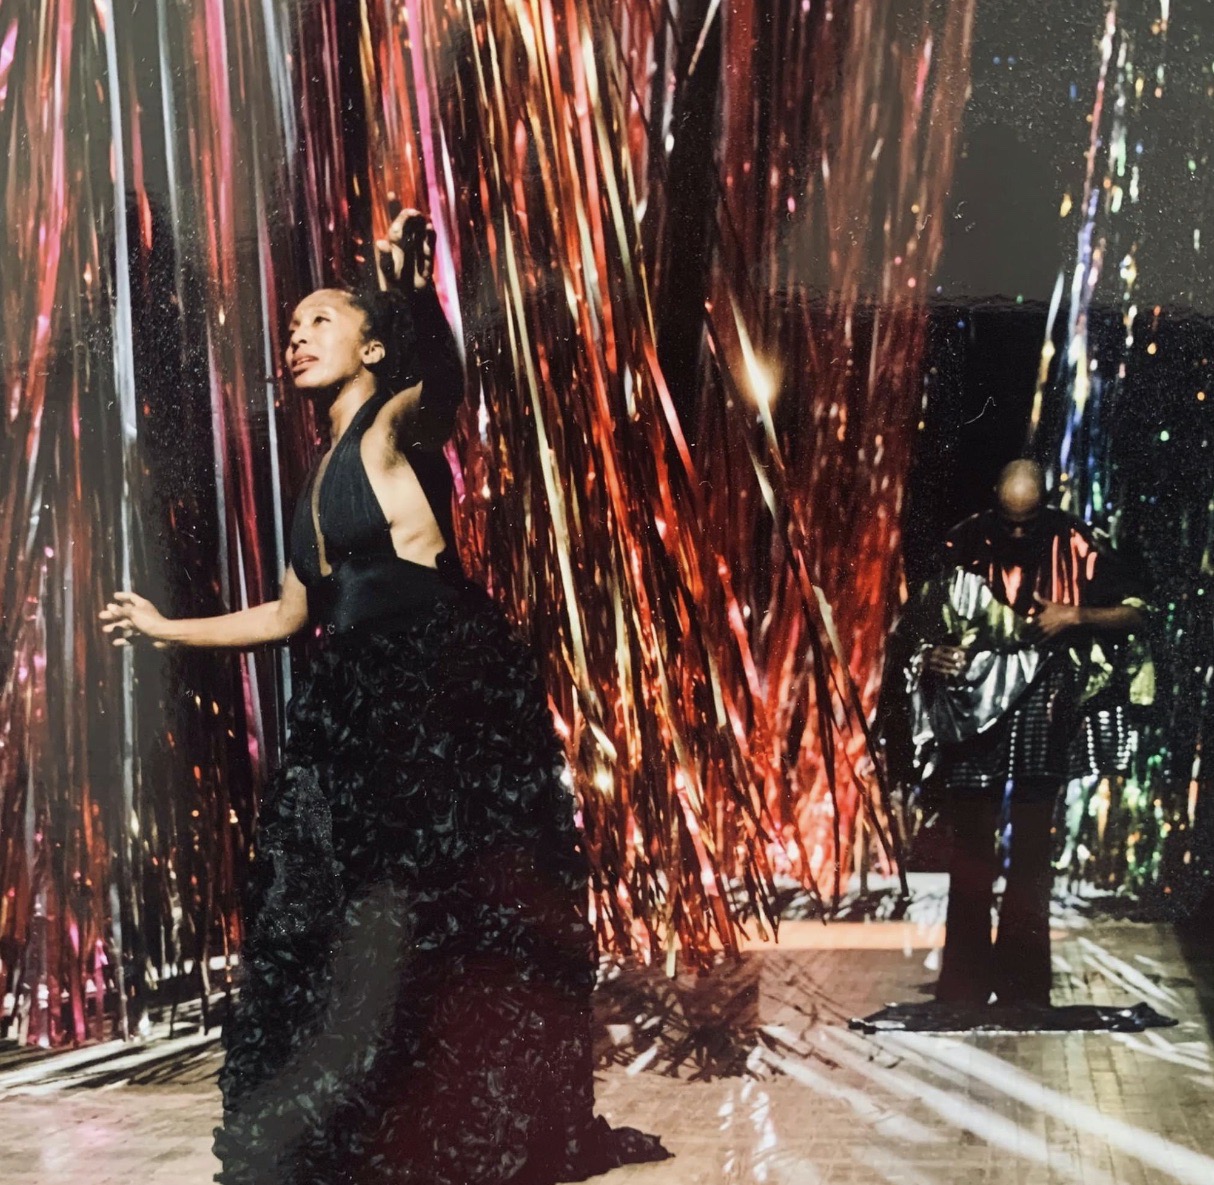 Francesca Harper in Foreground wearing a black halter gown with ruffled skirt.She is surrounded by large (ceiling to floor) strands of shiny tinsel-like material,there is a black man in the background of the shot with his head bowed.